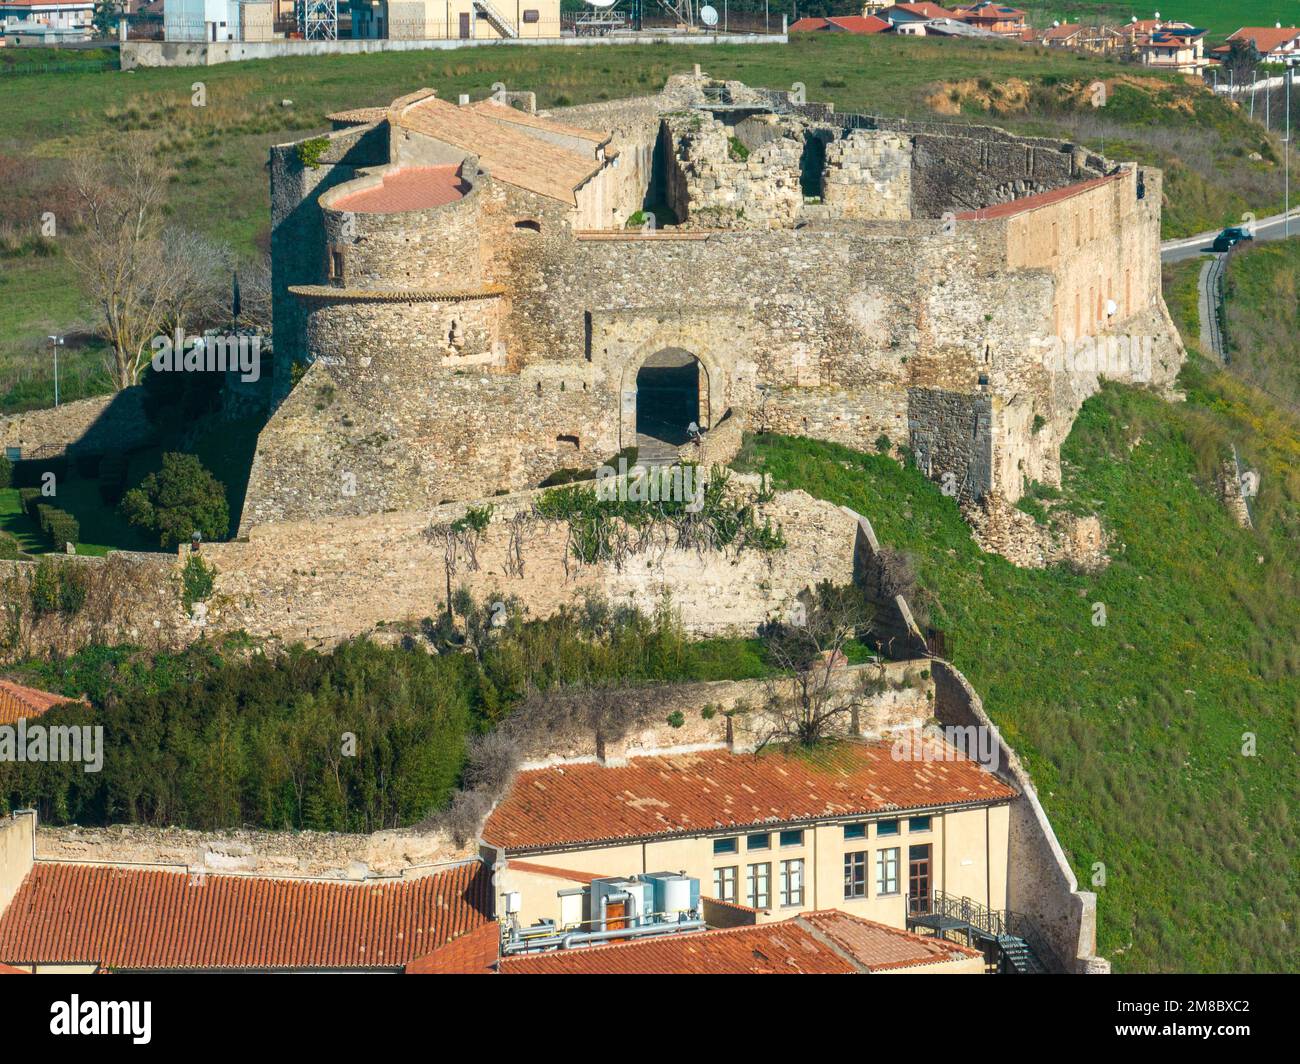 Aerial view of the Norman Swabian castle, Vibo Valentia, Calabria, Italy Stock Photo